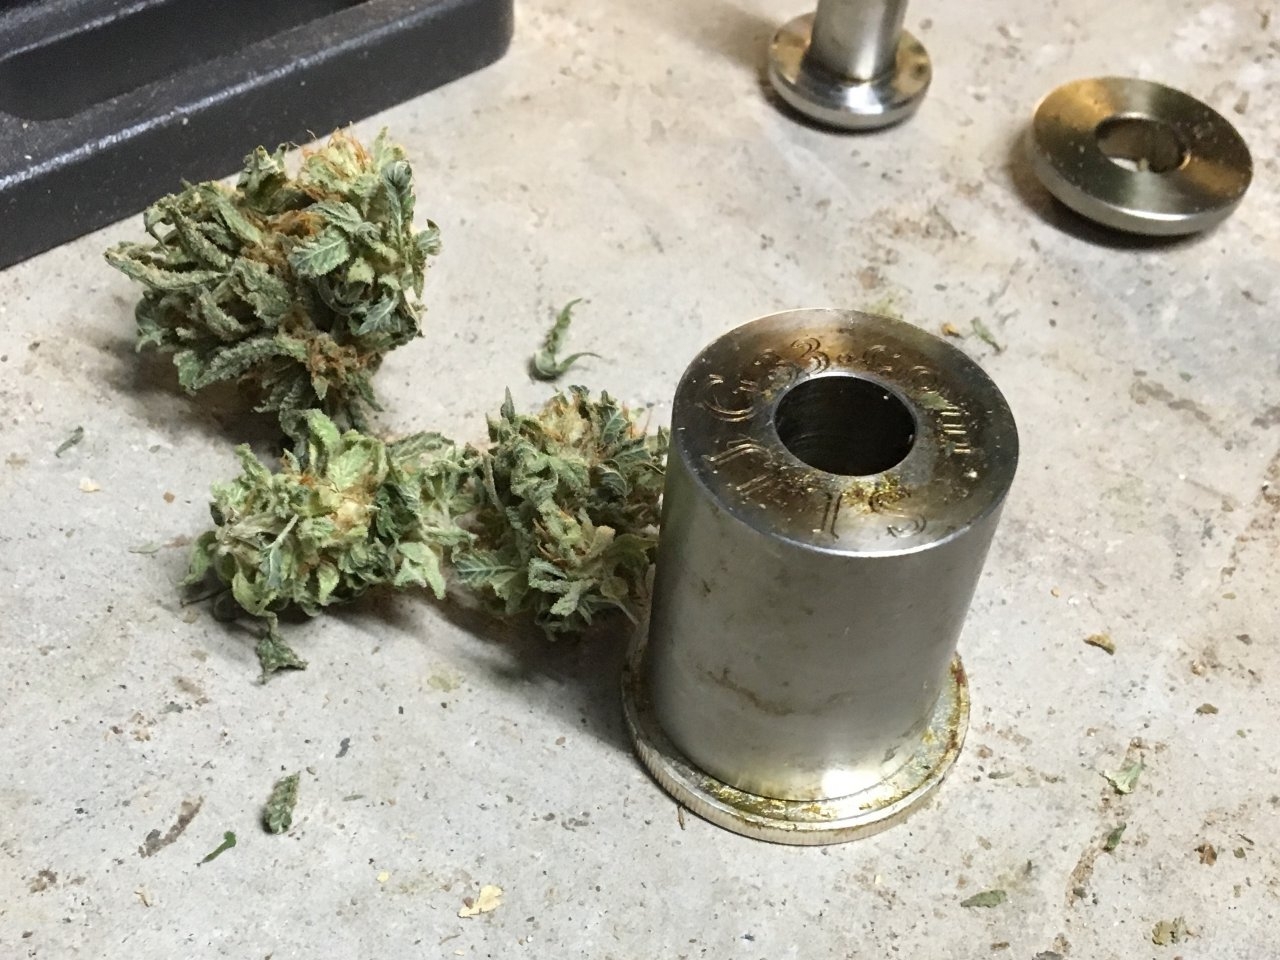 Set cylinder on coin to keep buds from falling out.